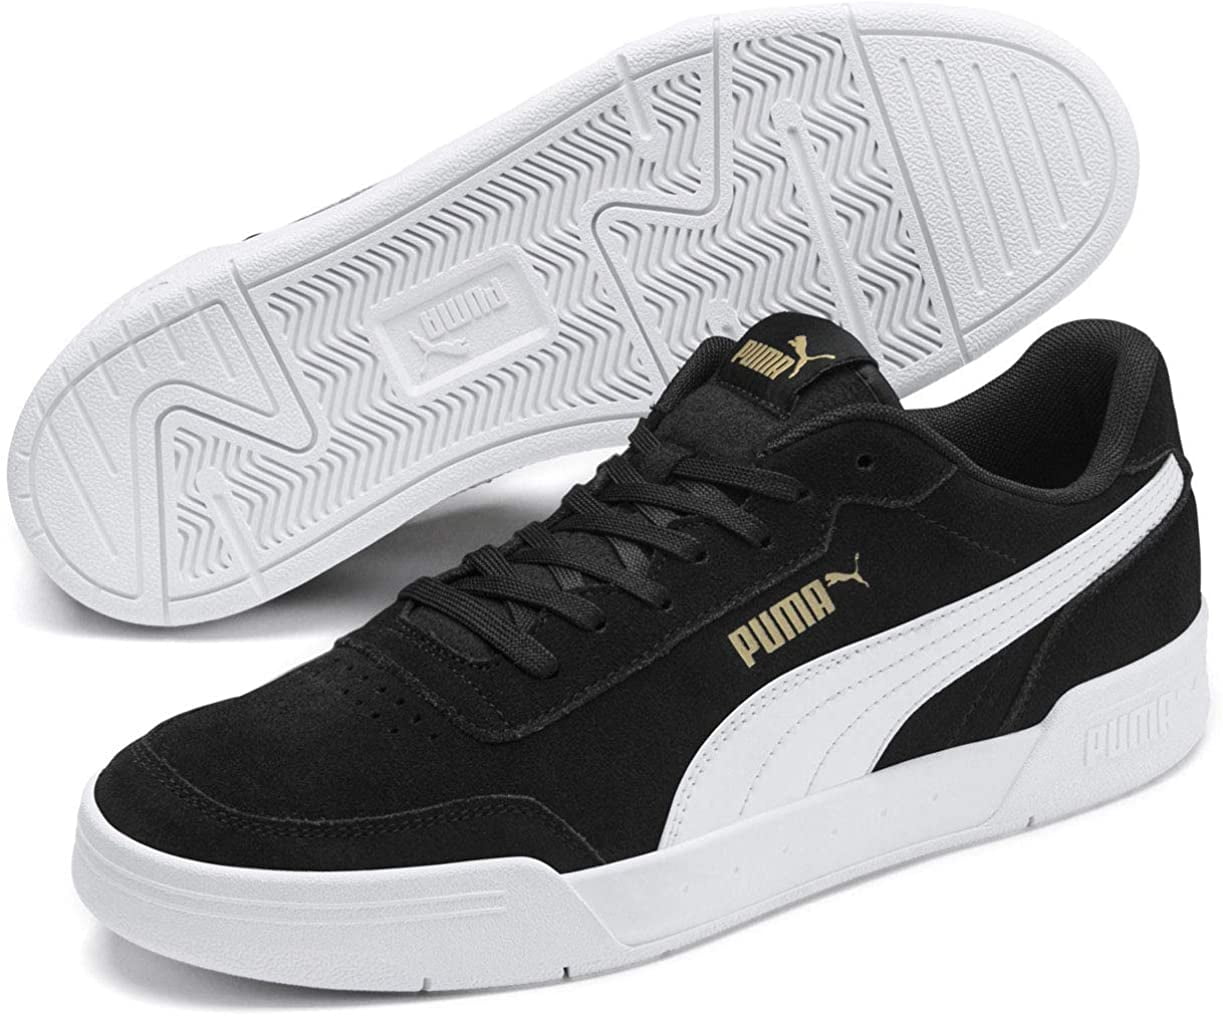 black white and gold pumas